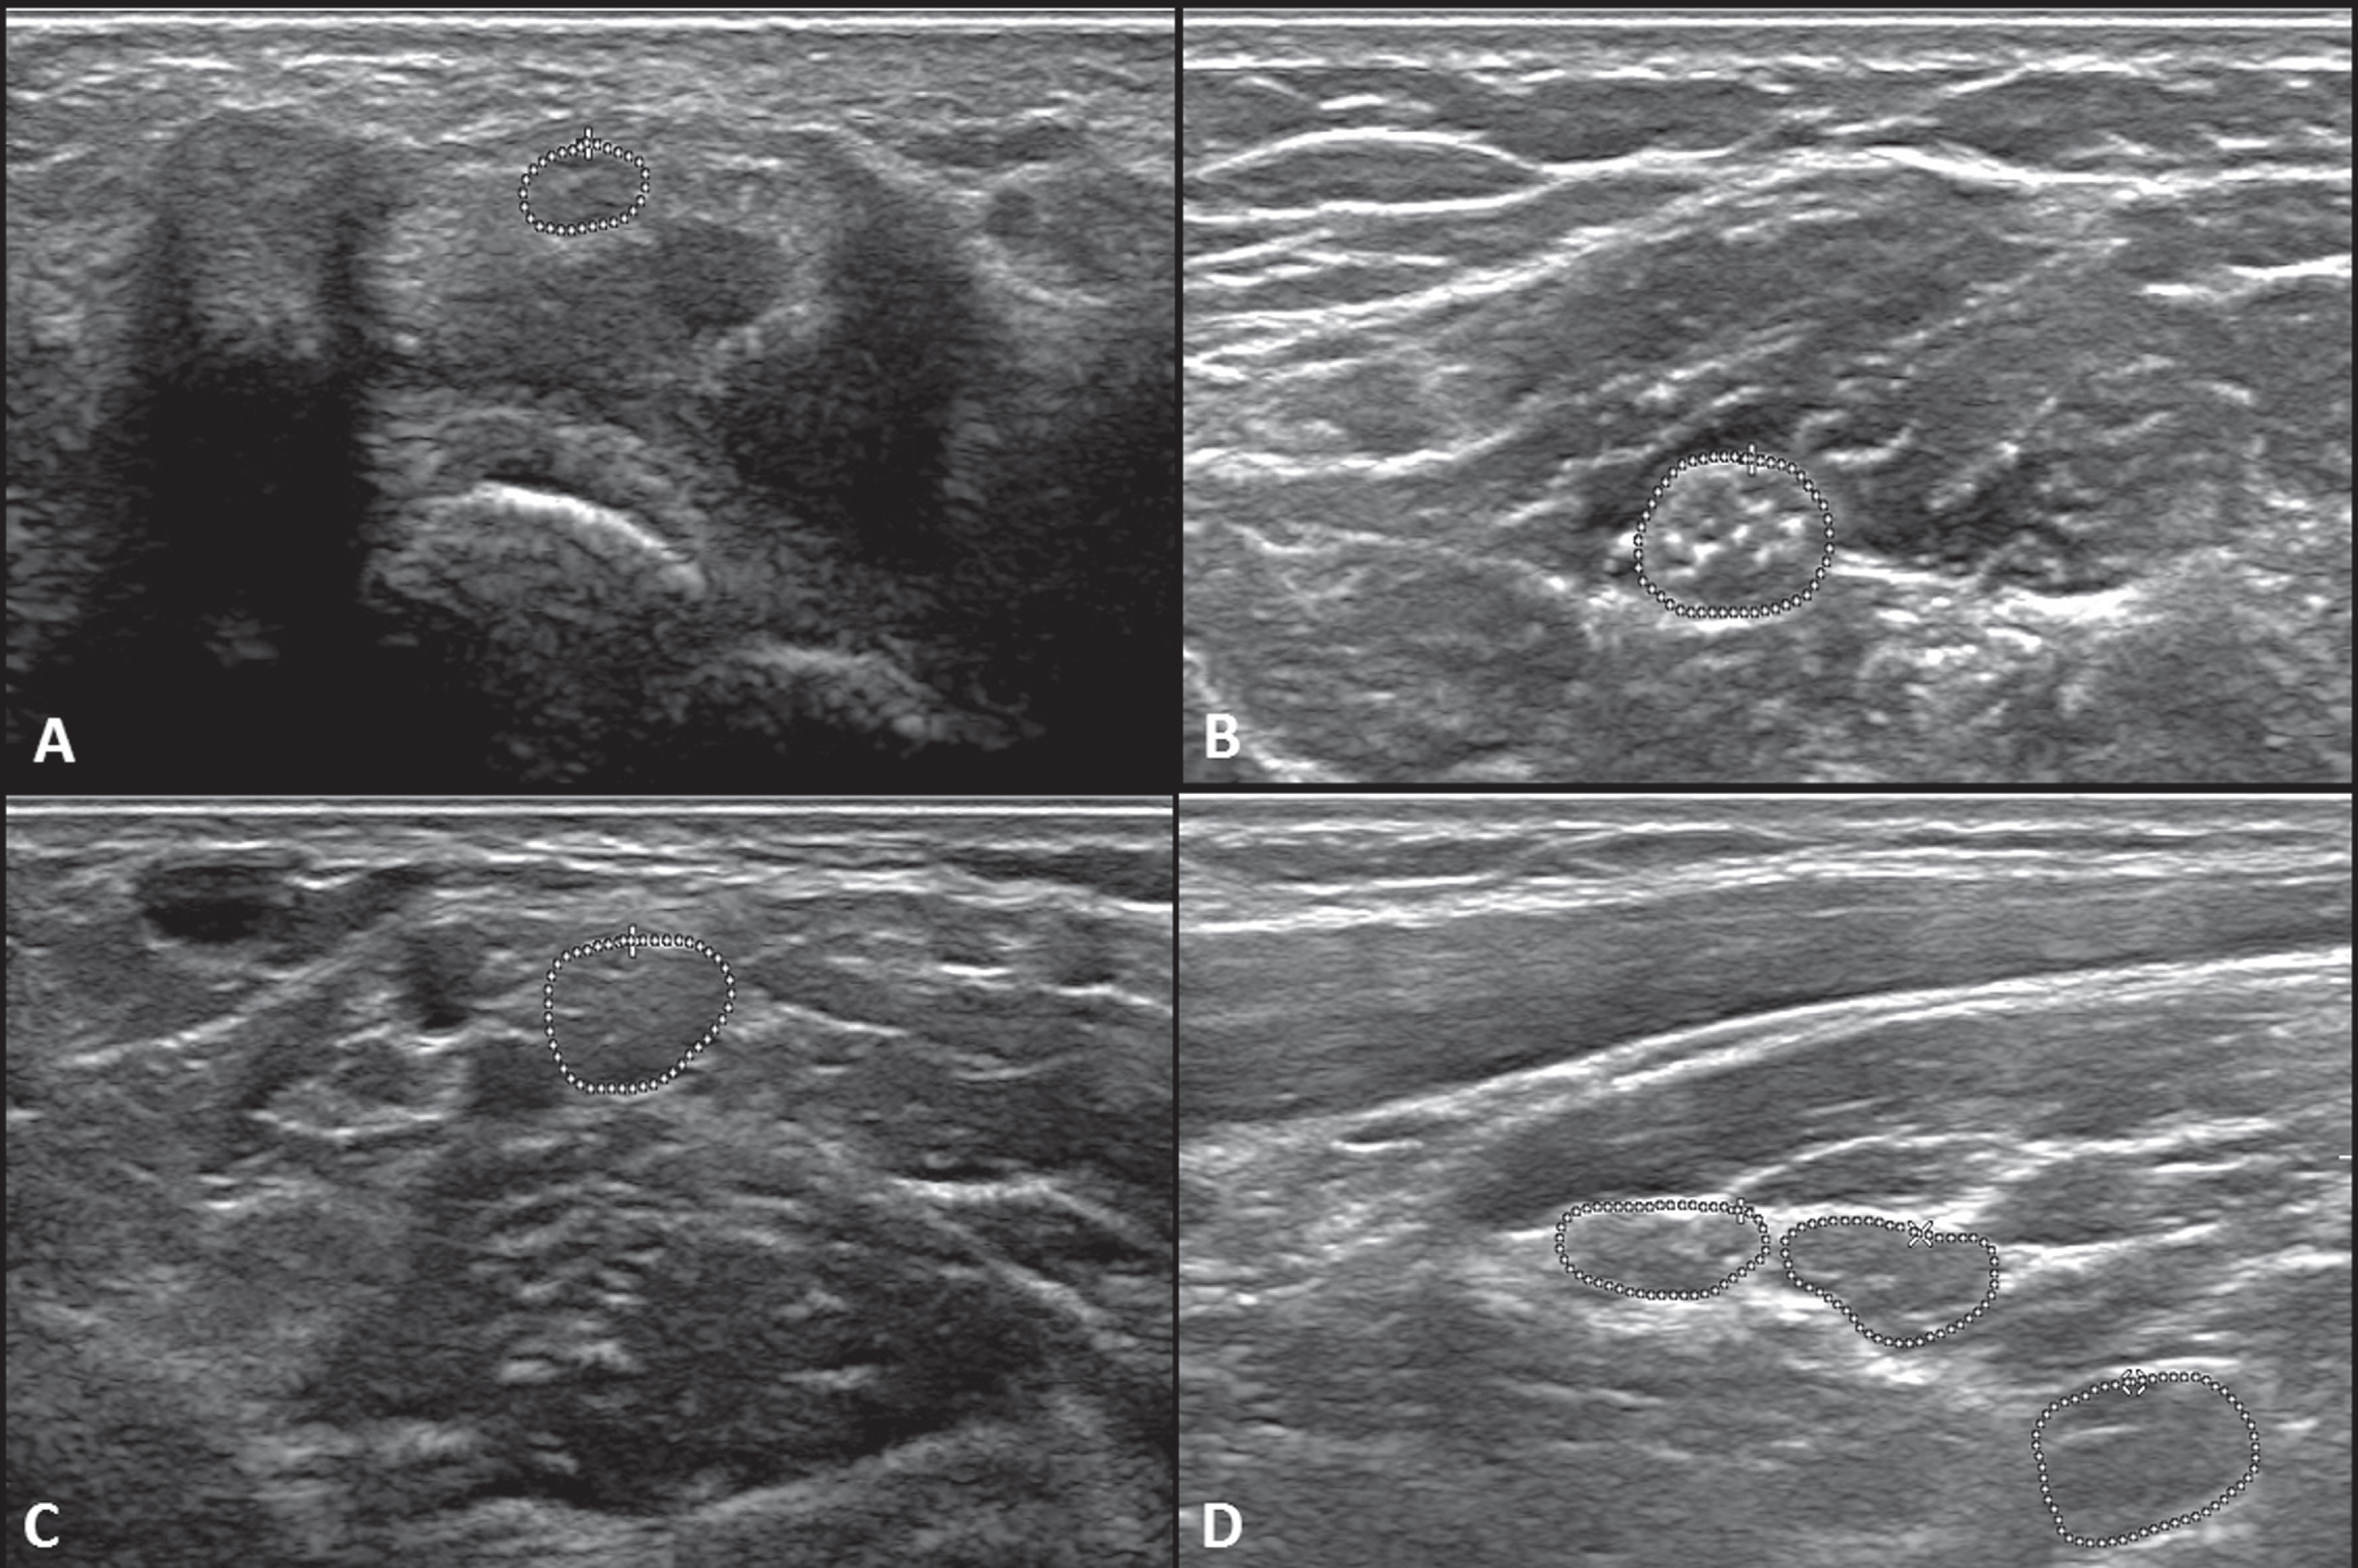 Ultrasound cross-section images of the median and ulnar nerves. Fig 2.1 (a) Right Median nerve at the wrist (area = 5.9 mm2), (b) Right Median nerve at mid-forearm between the flexor digitorum superficialis and flexor digitorum profundus (area = 17.8 mm2), (c) Right Median nerve at the elbow medial to the brachial artery (area = 15.6 mm2), (d) Right Brachial plexus upper (area = 14.2 mm2), middle (area = 16.9 mm2), and lower truck (area = 25.7 mm2).